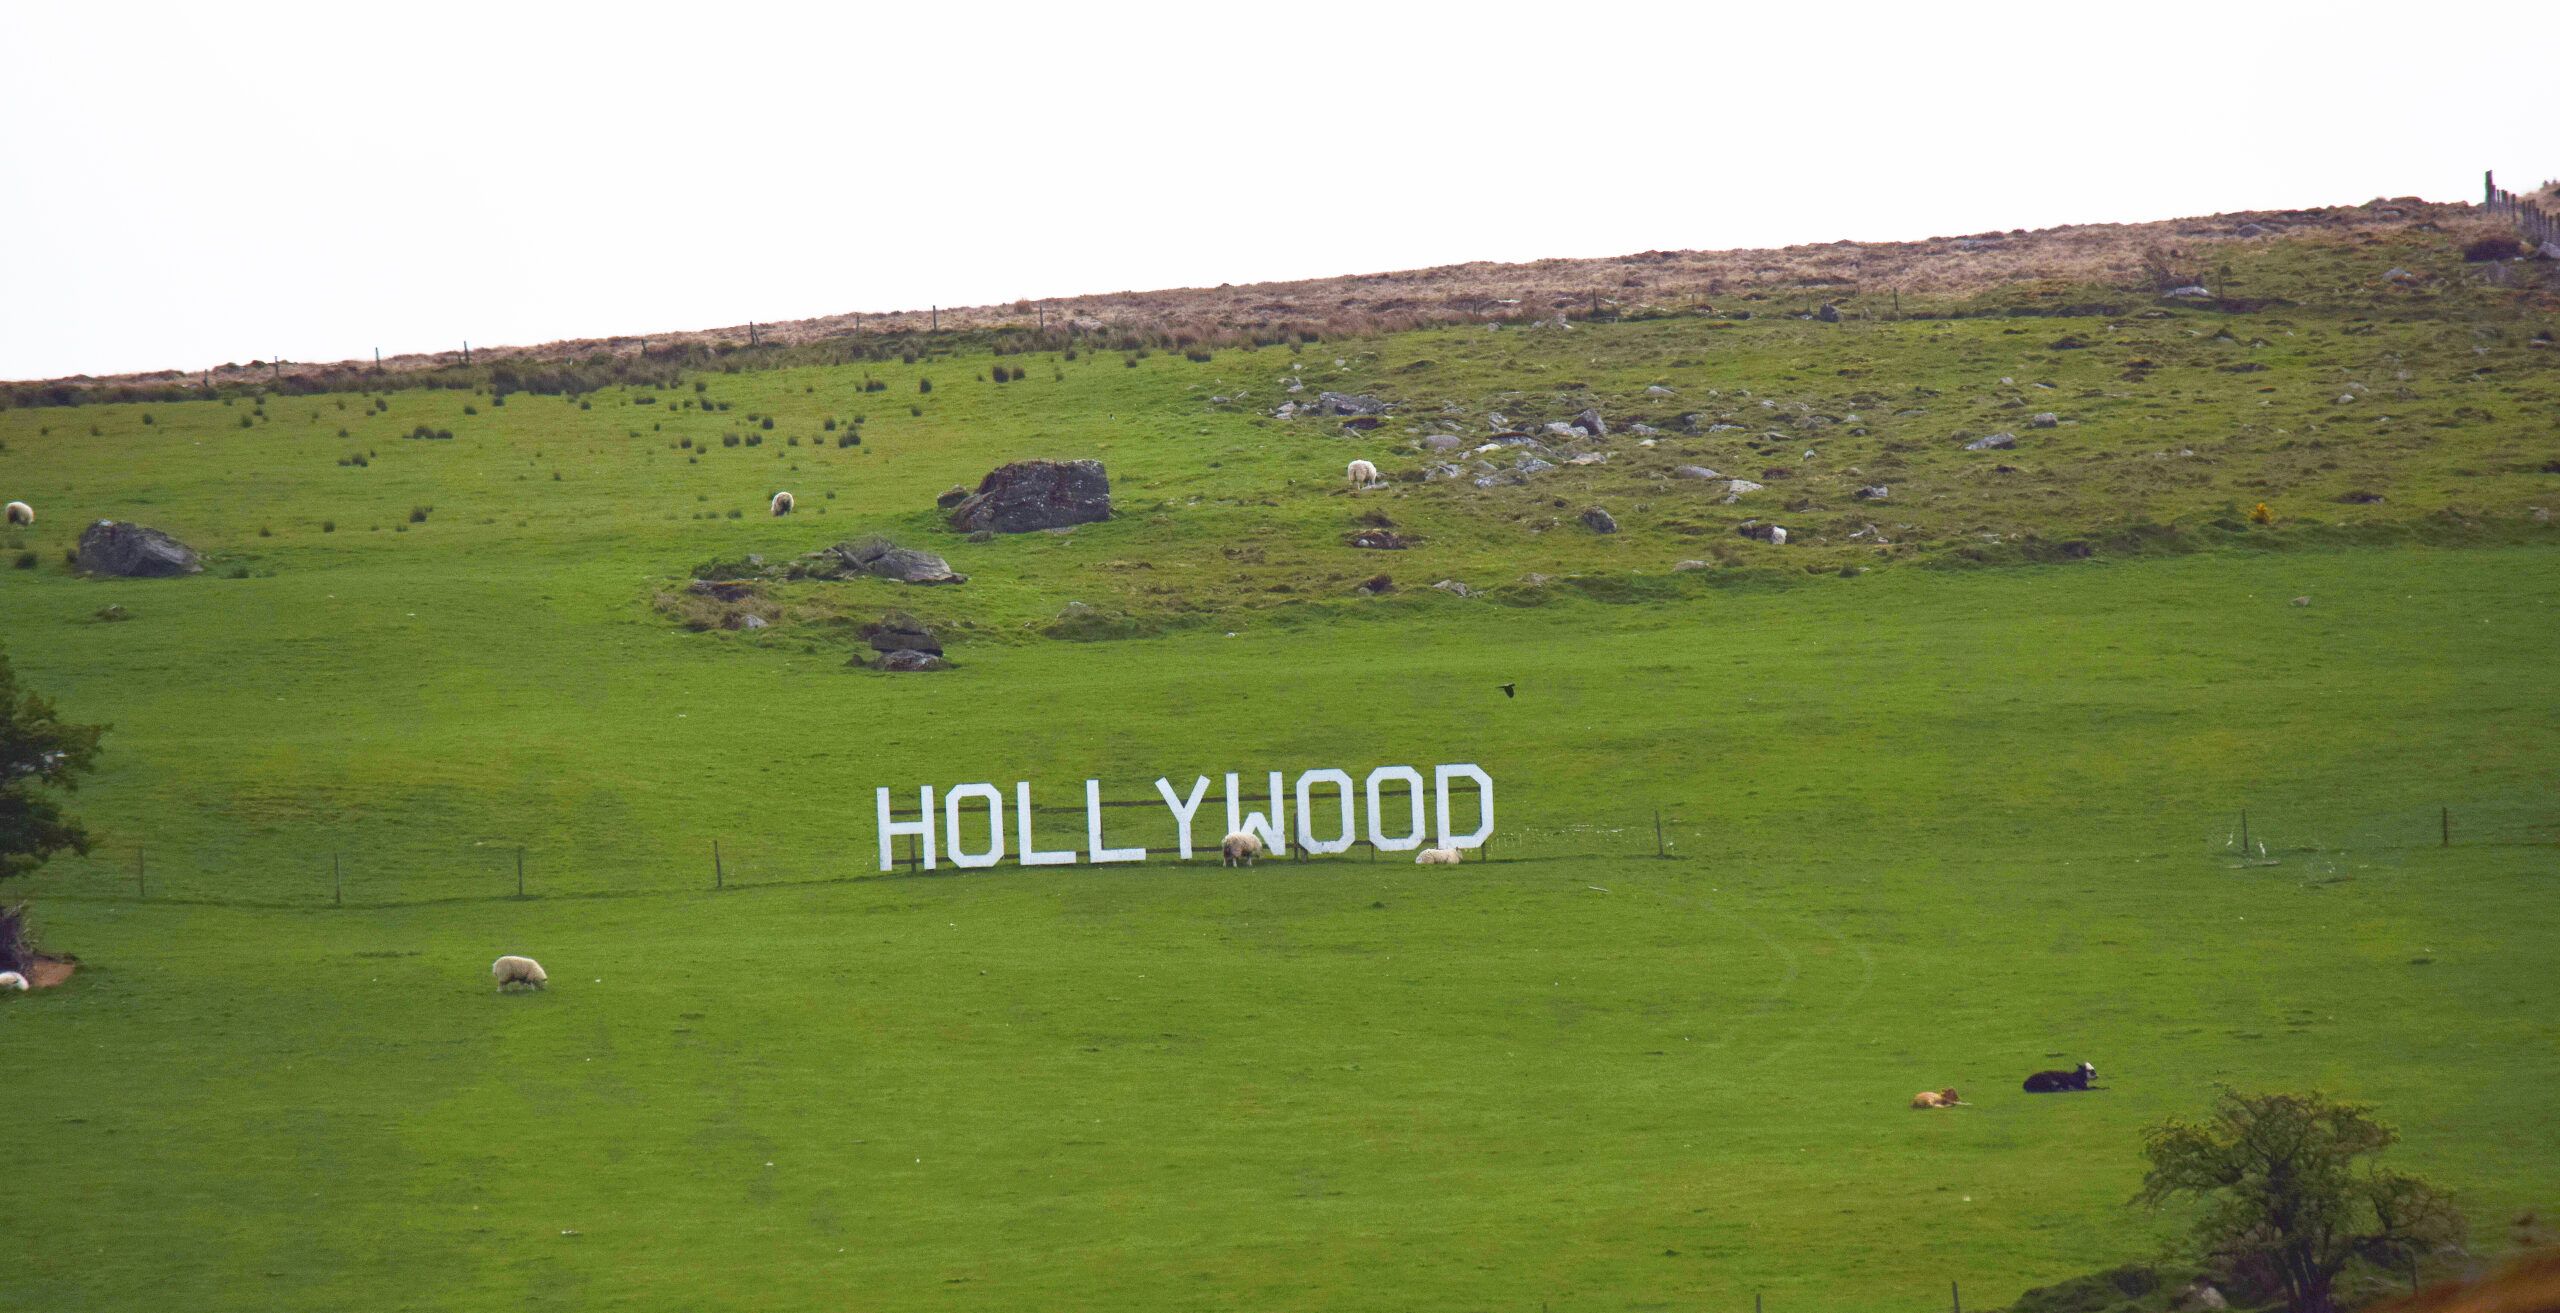 Hollywood sign in Ireland